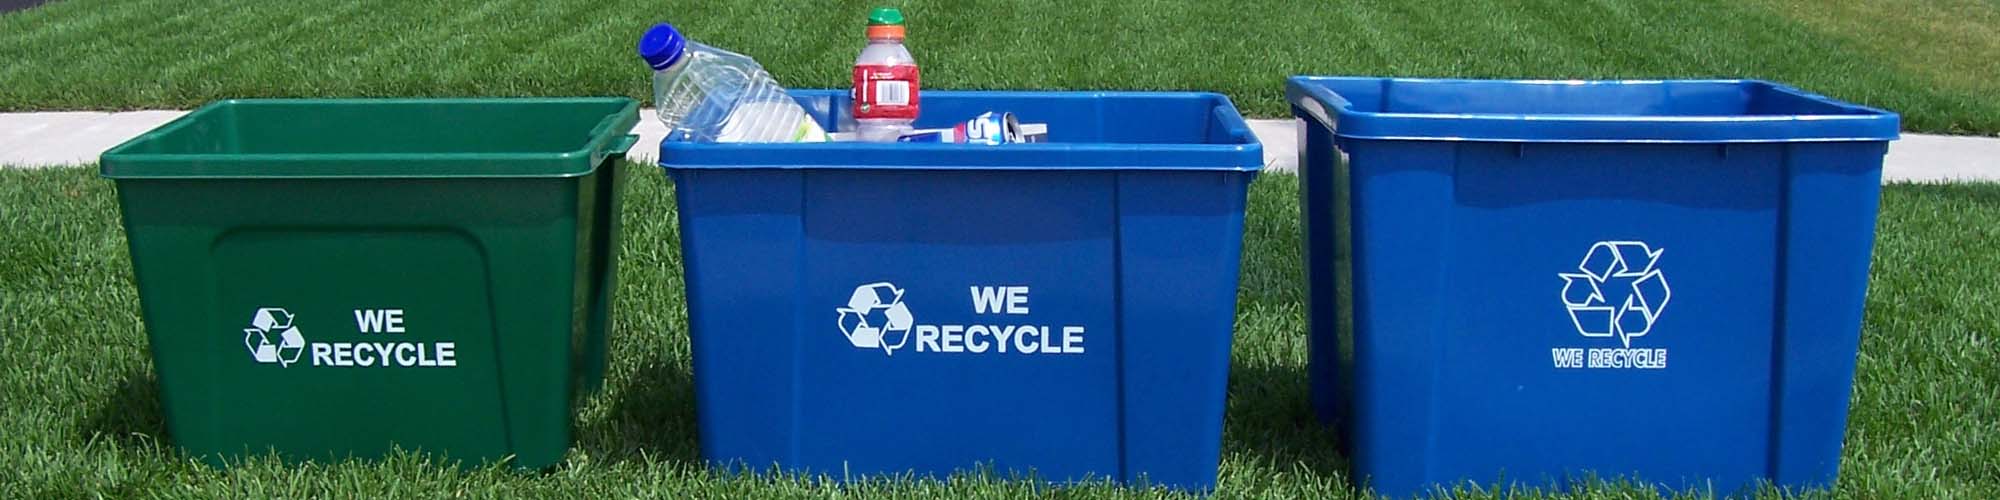 Busch systems Curbside recycling and organics bins